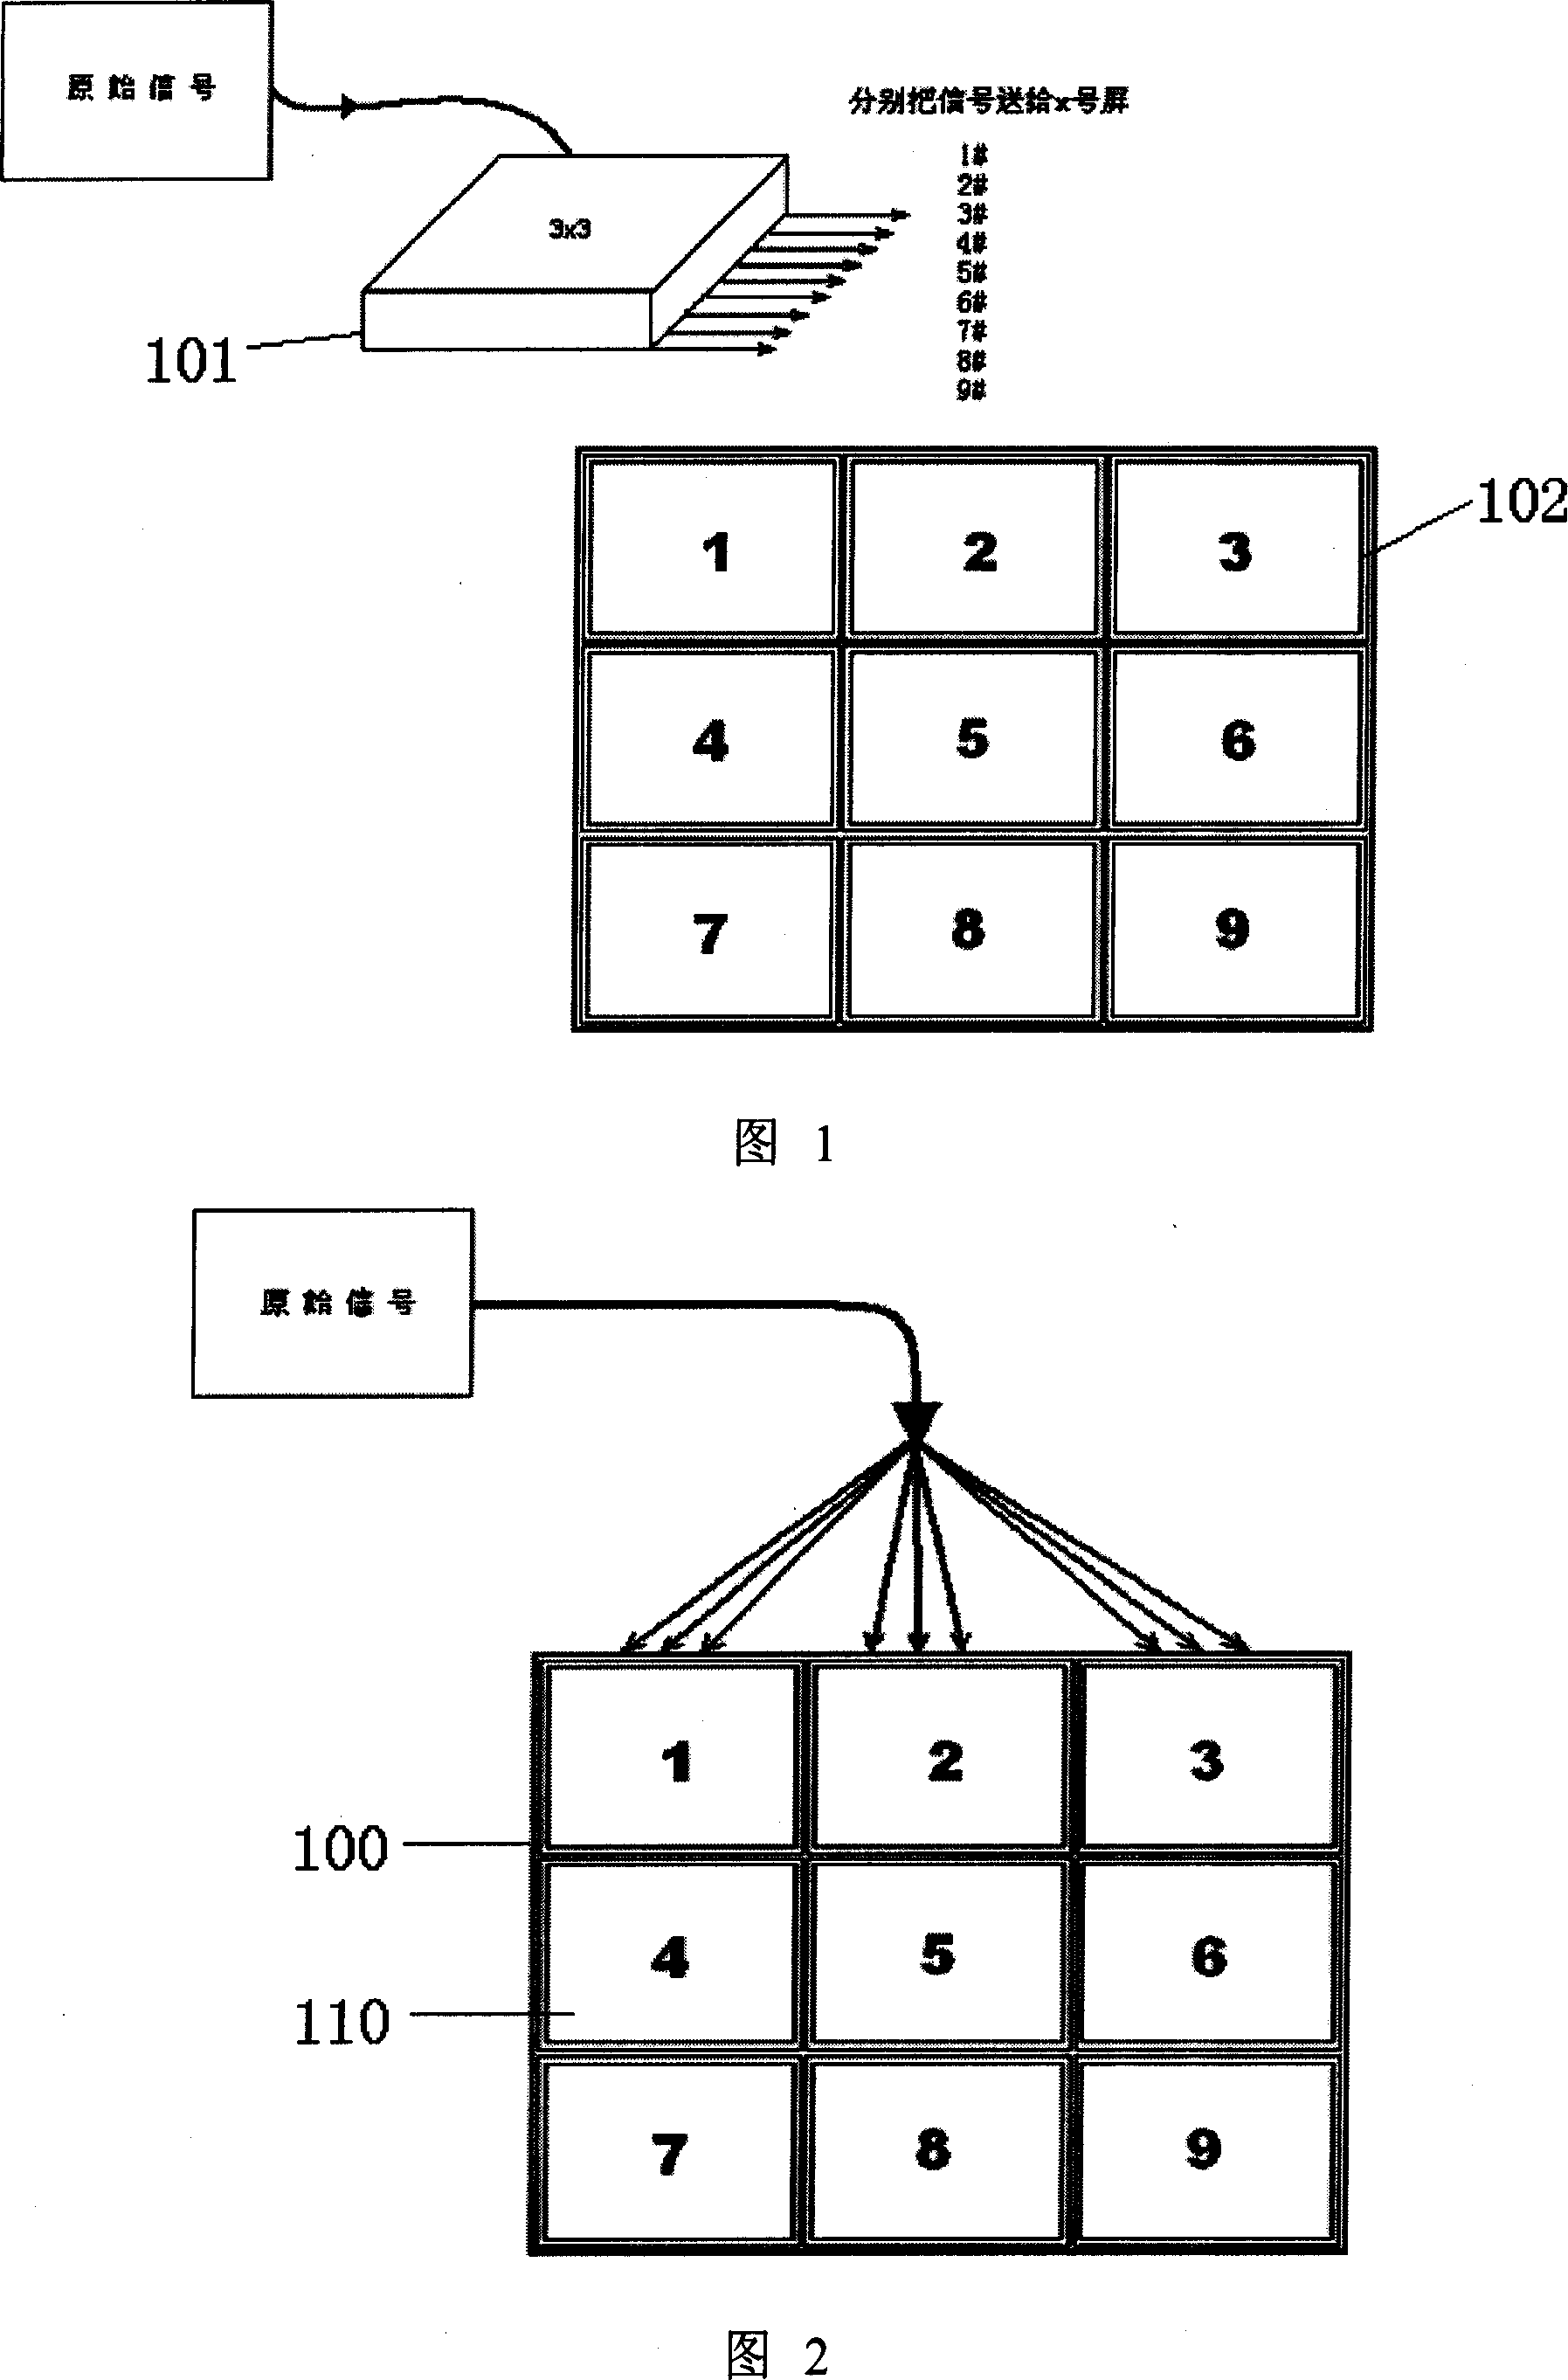 A method for displaying image of multi-picture combined TV wall